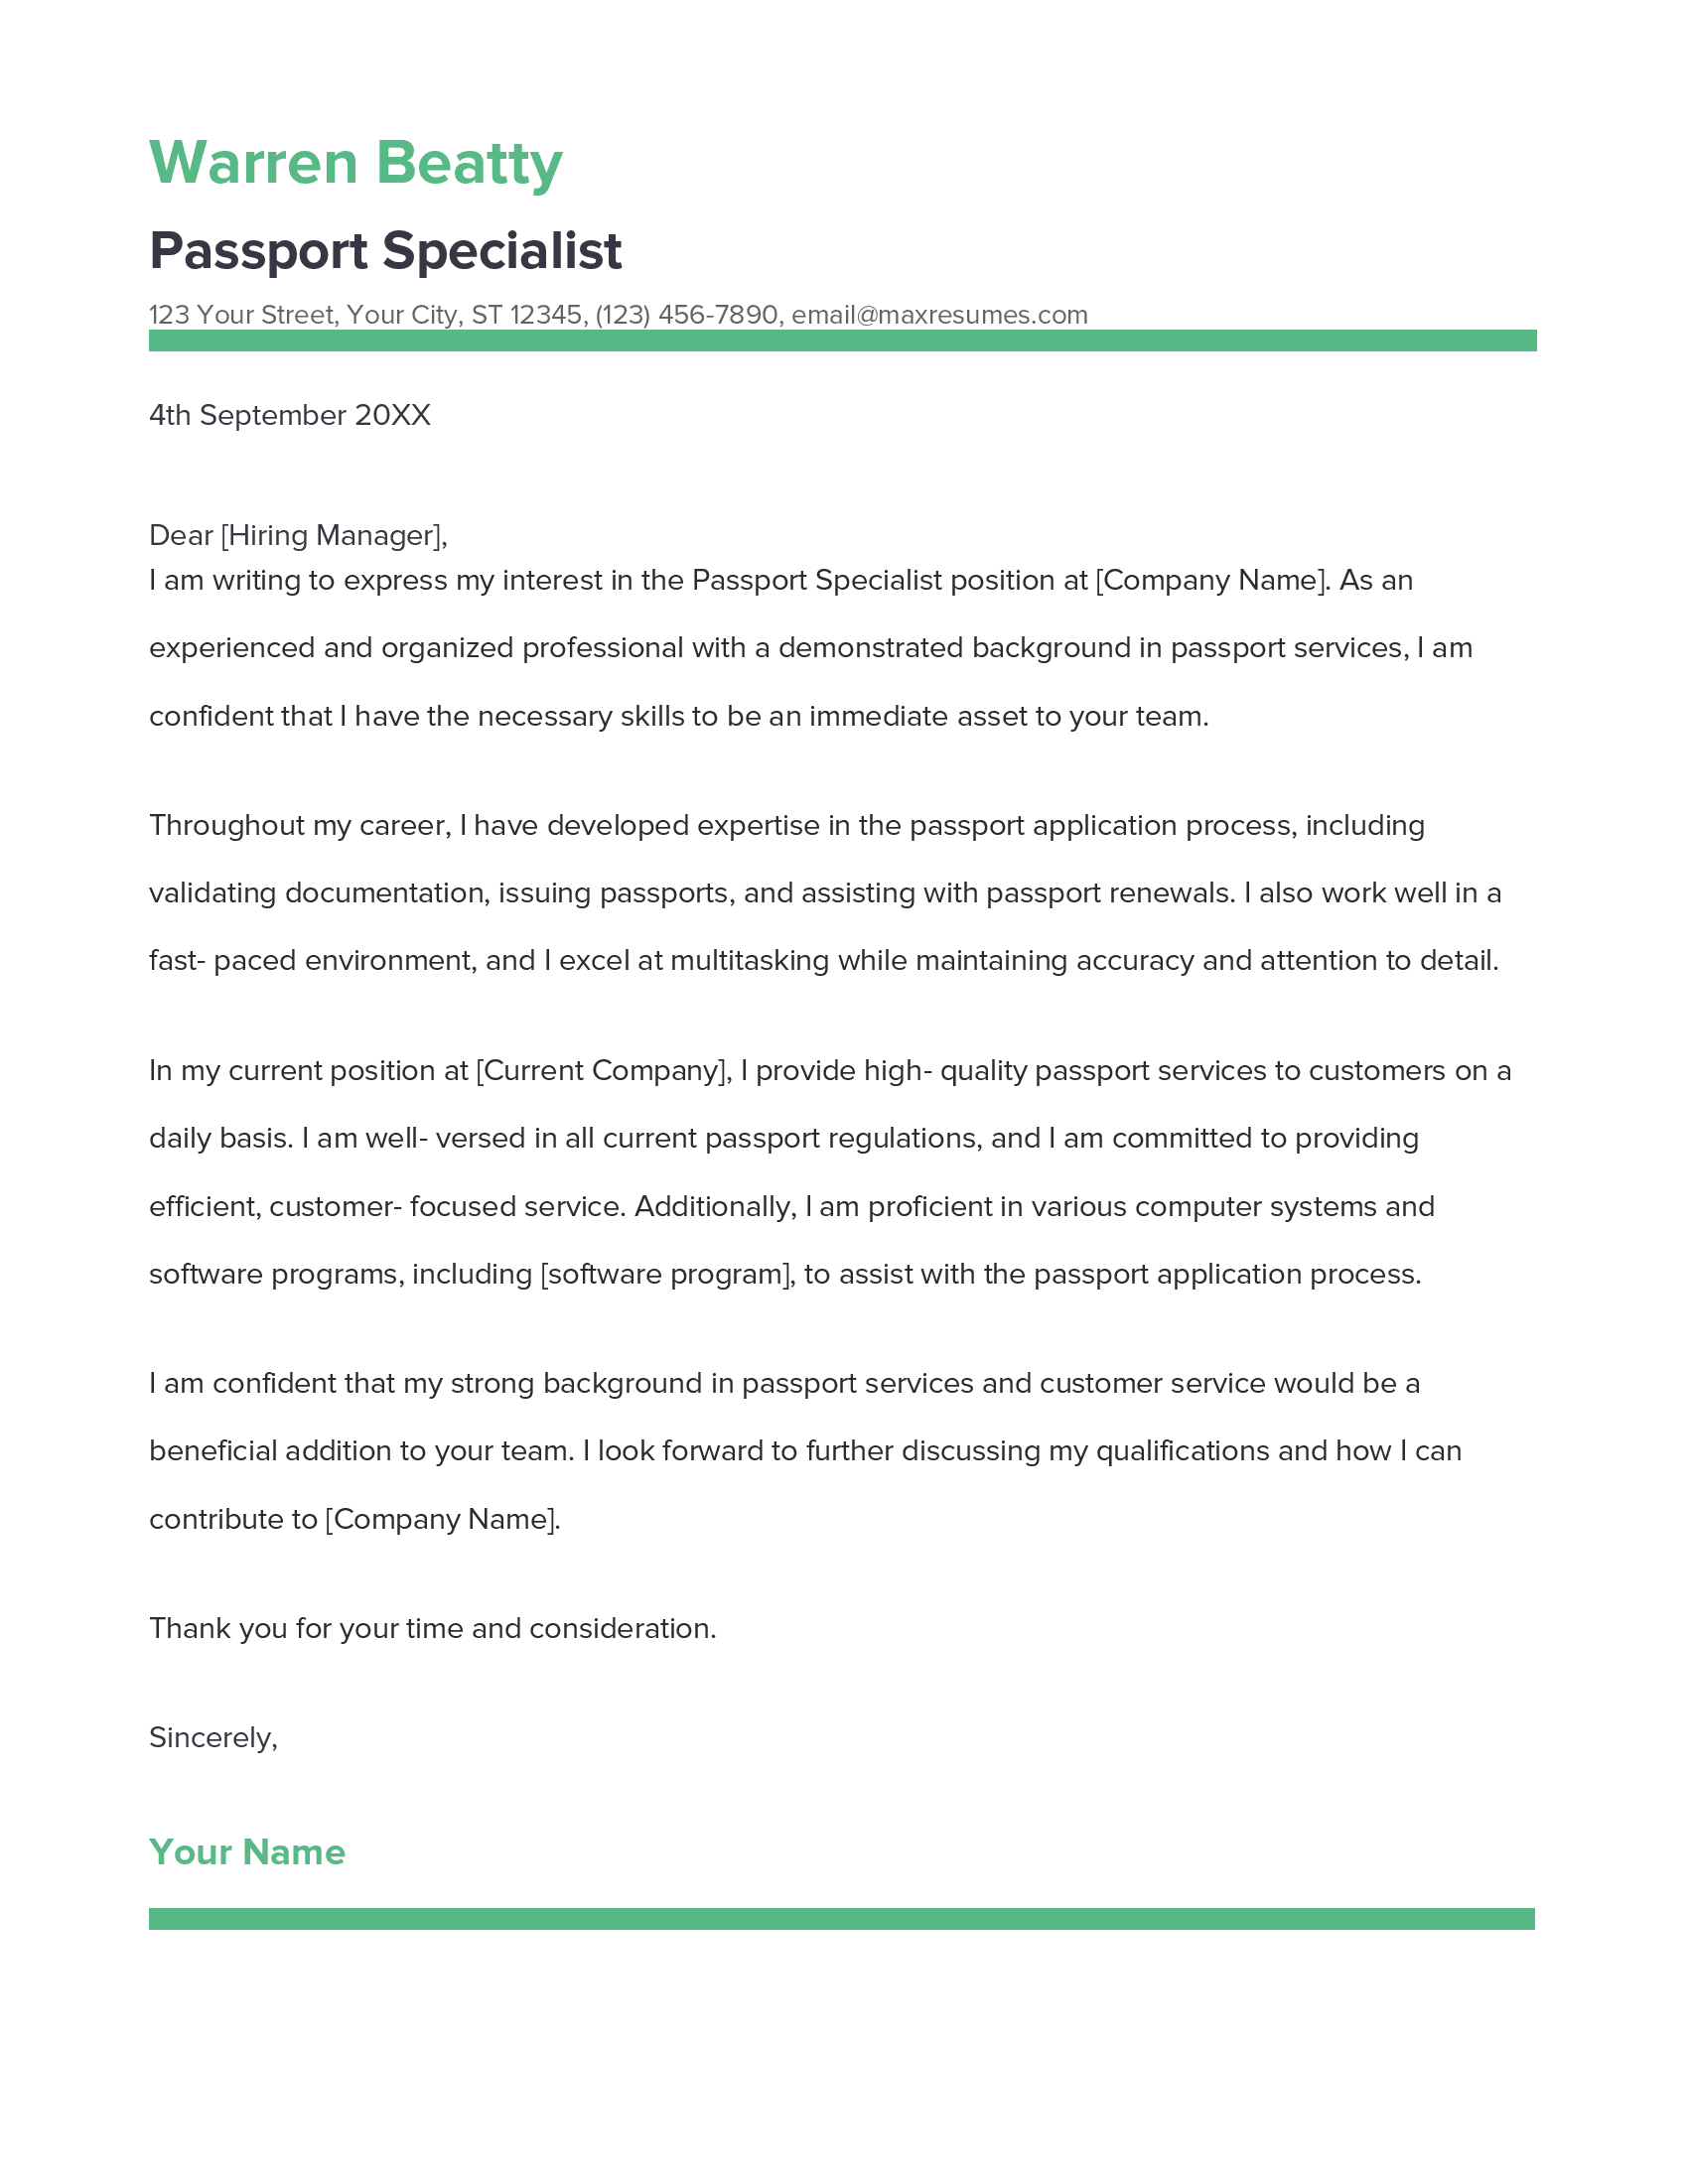 Passport Specialist Cover Letter Example